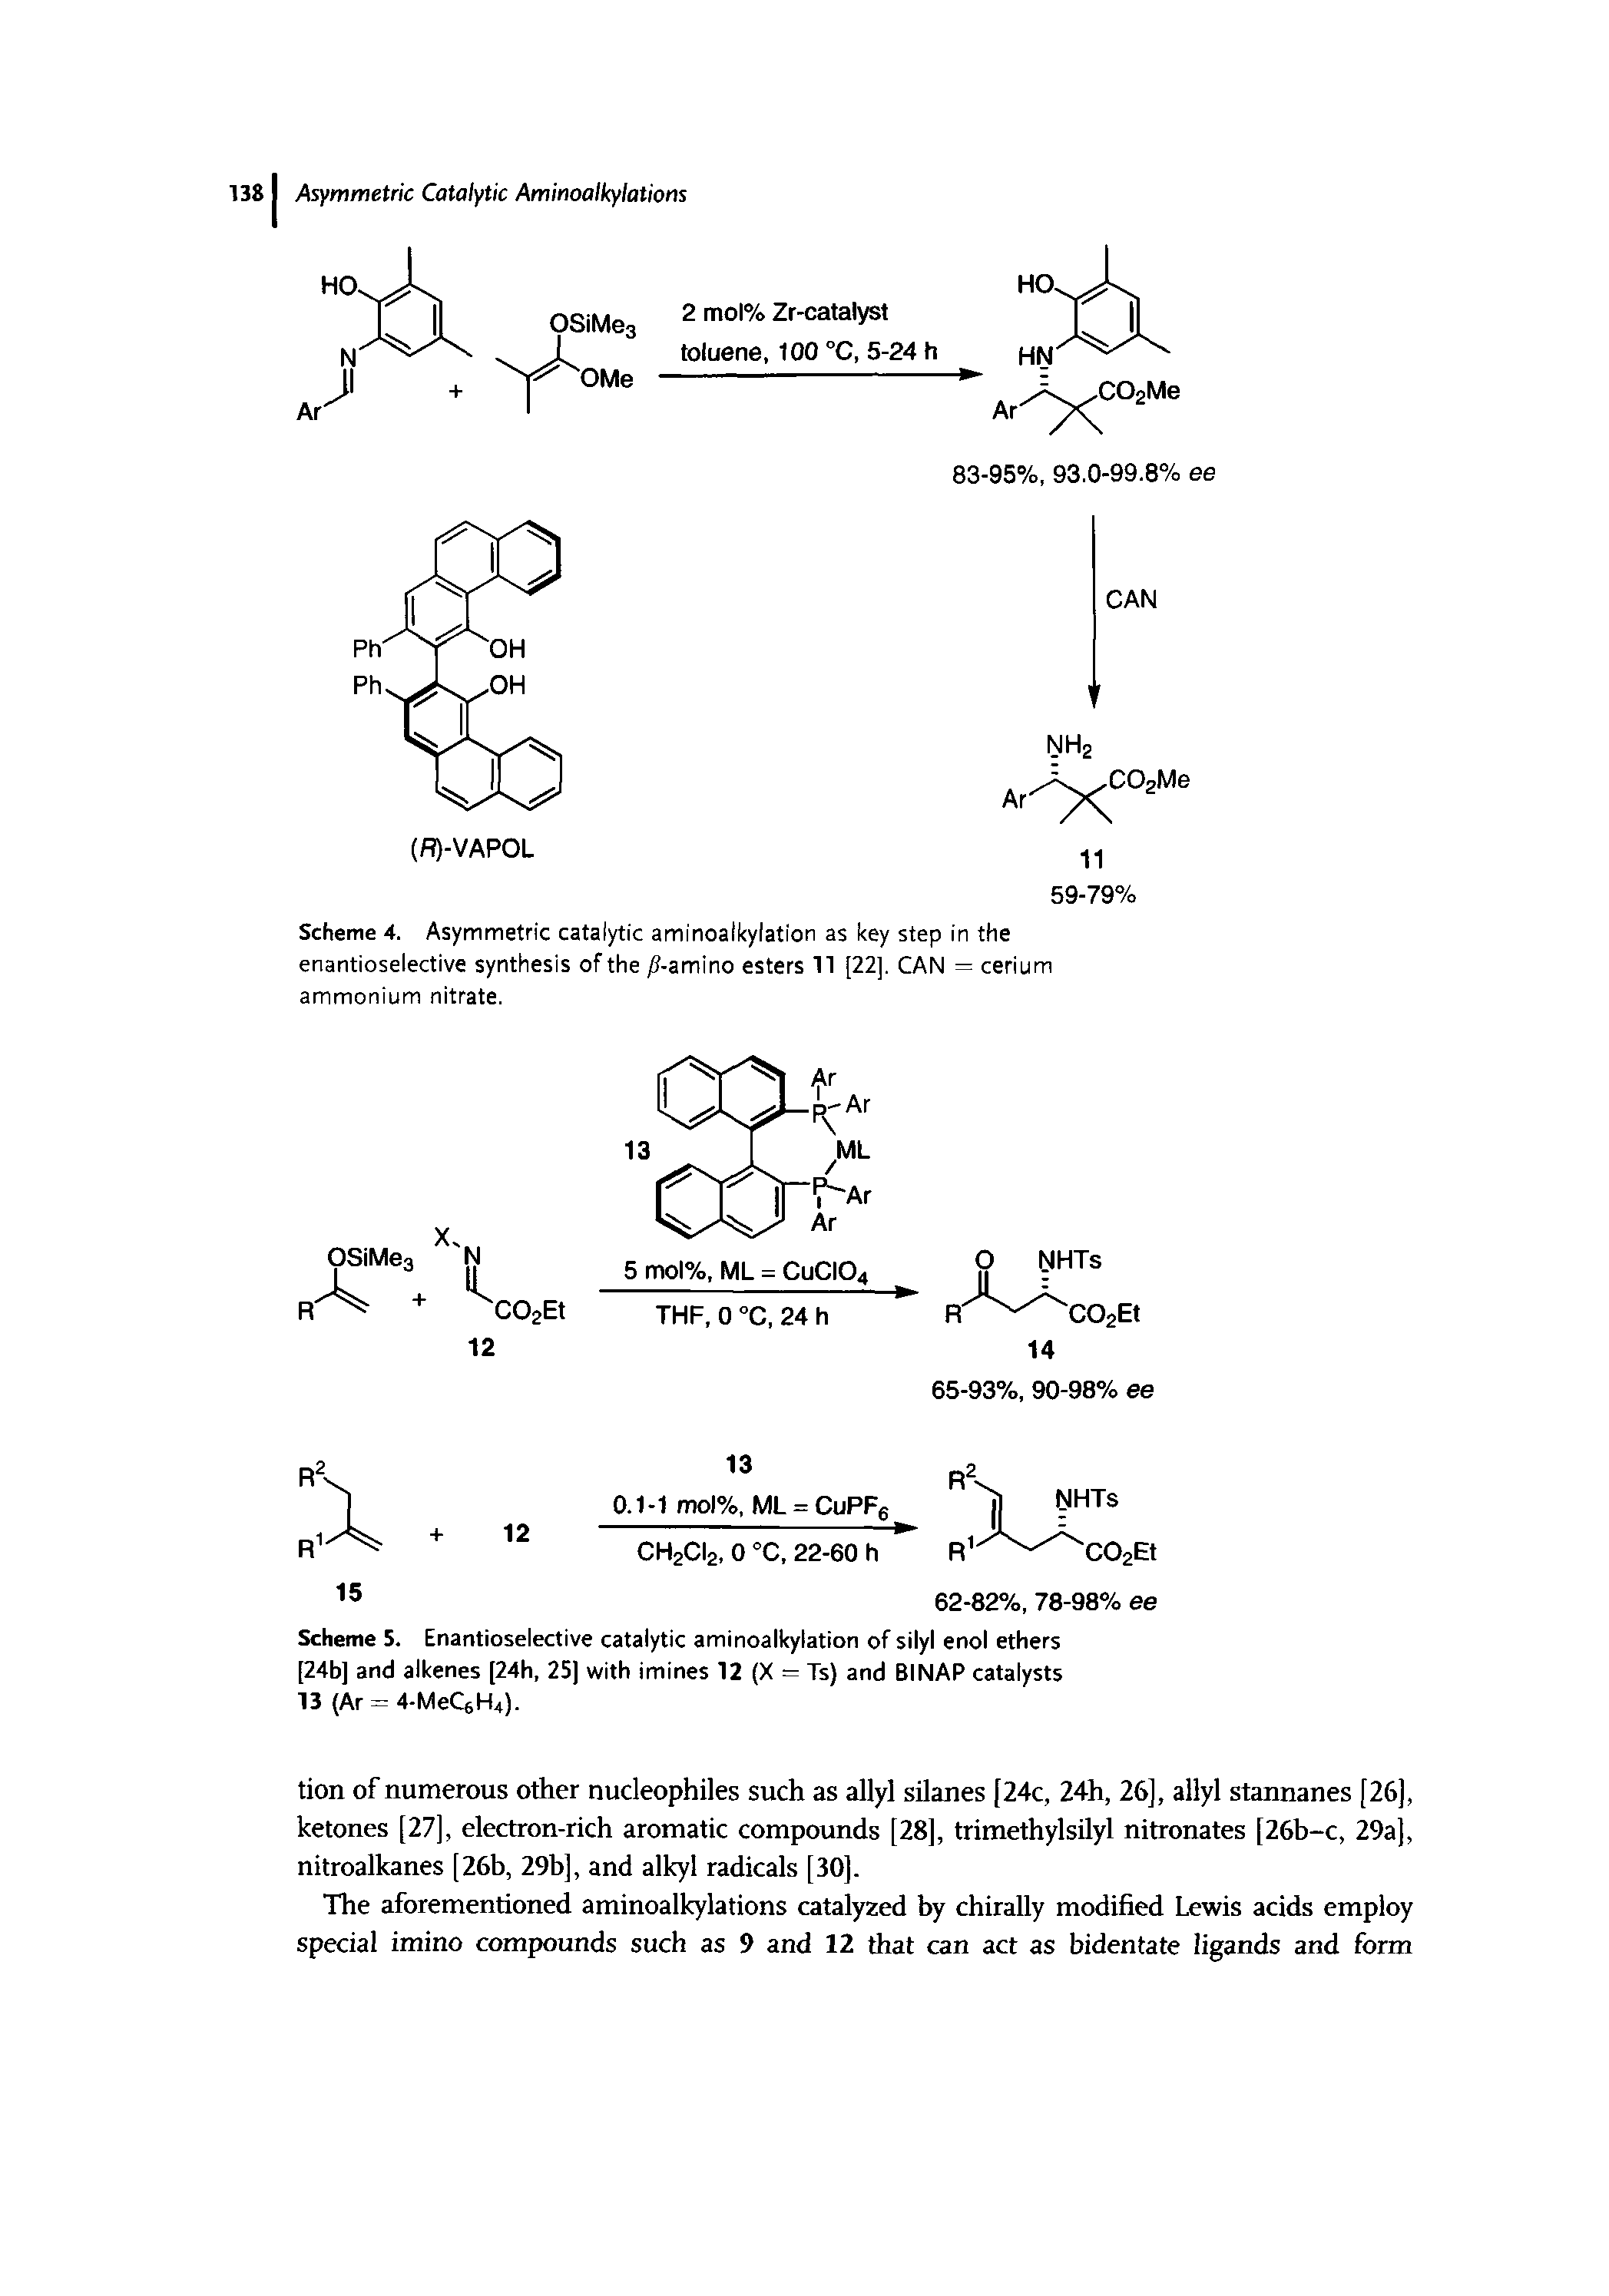 Scheme 5. Enantioselective catalytic aminoalkylation of silyl enol ethers [24b] and alkenes [24h, 25] with imines 12 (X = Ts) and BINAP catalysts 13 (Ar = 4-MeC6H4).